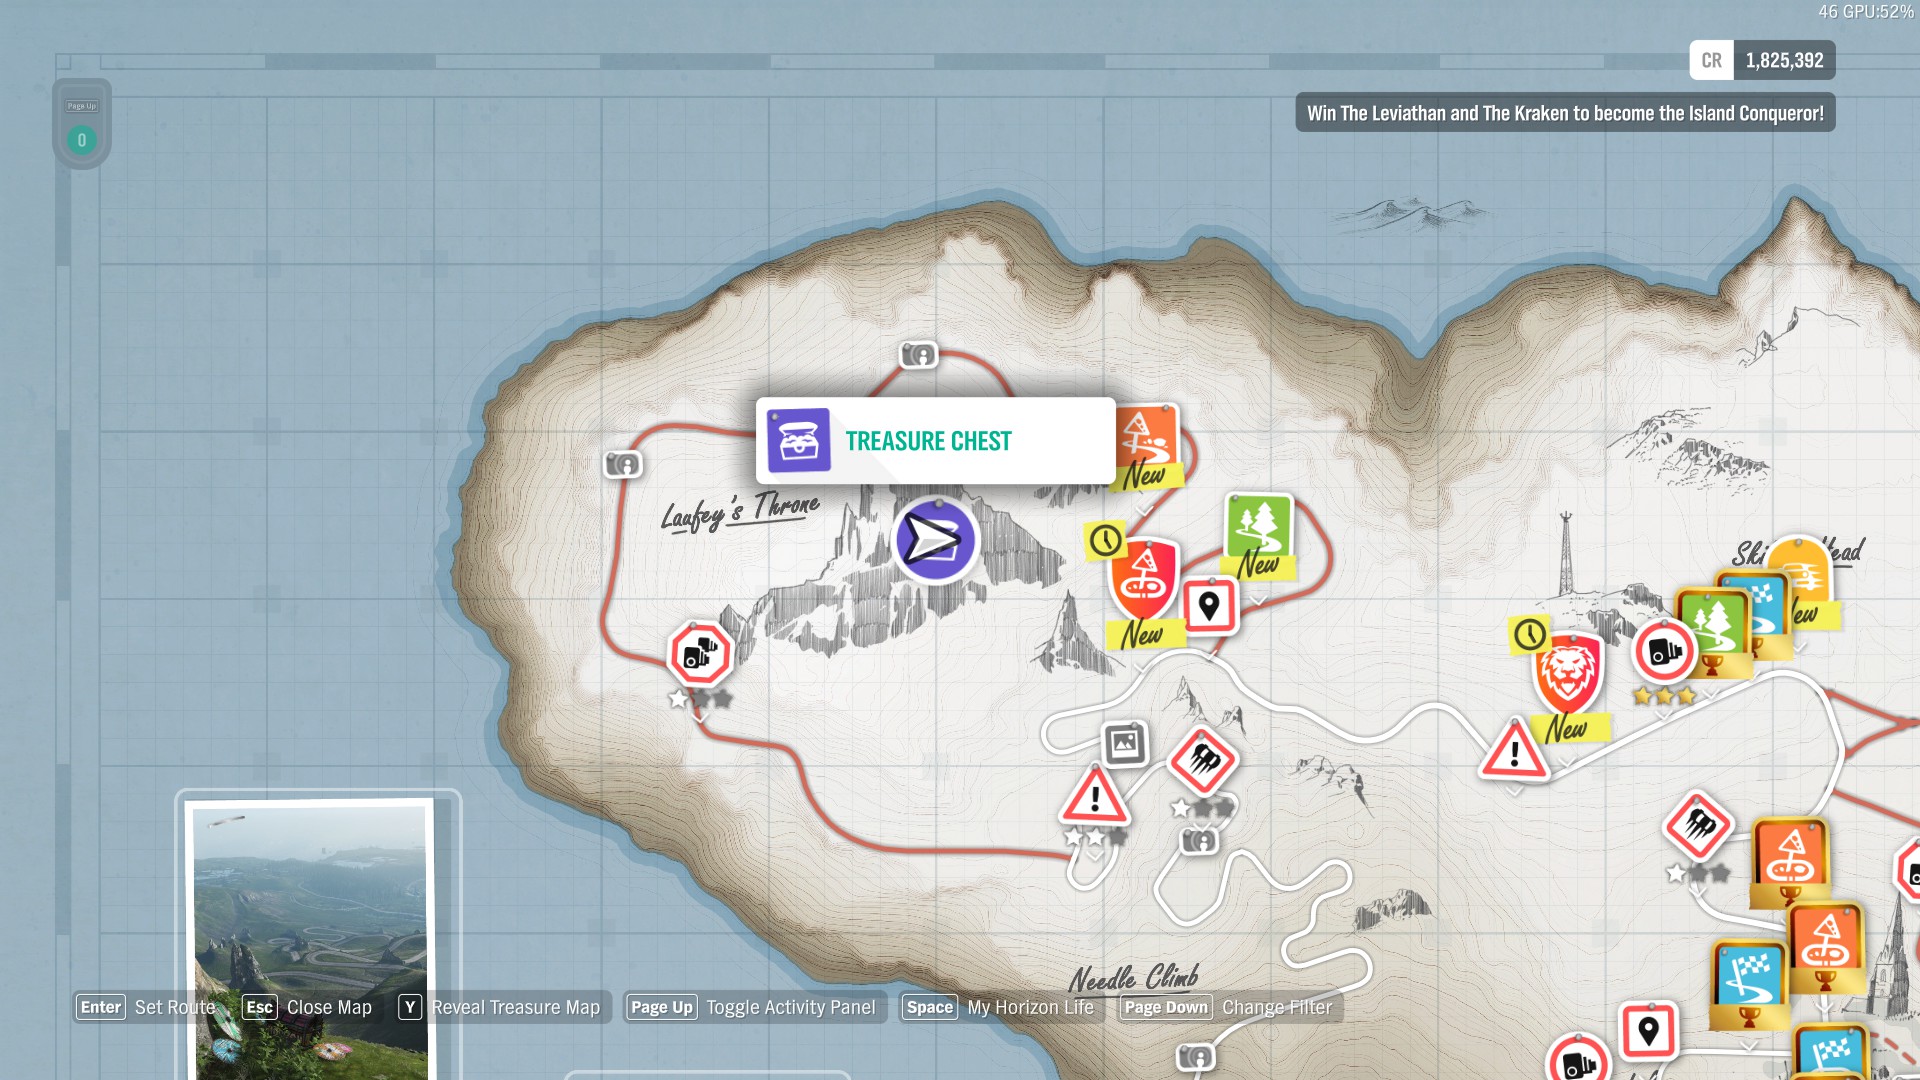 Forza Horizon 4 Fortune Island All Riddles And Treasure Chest Locations Steam Lists 